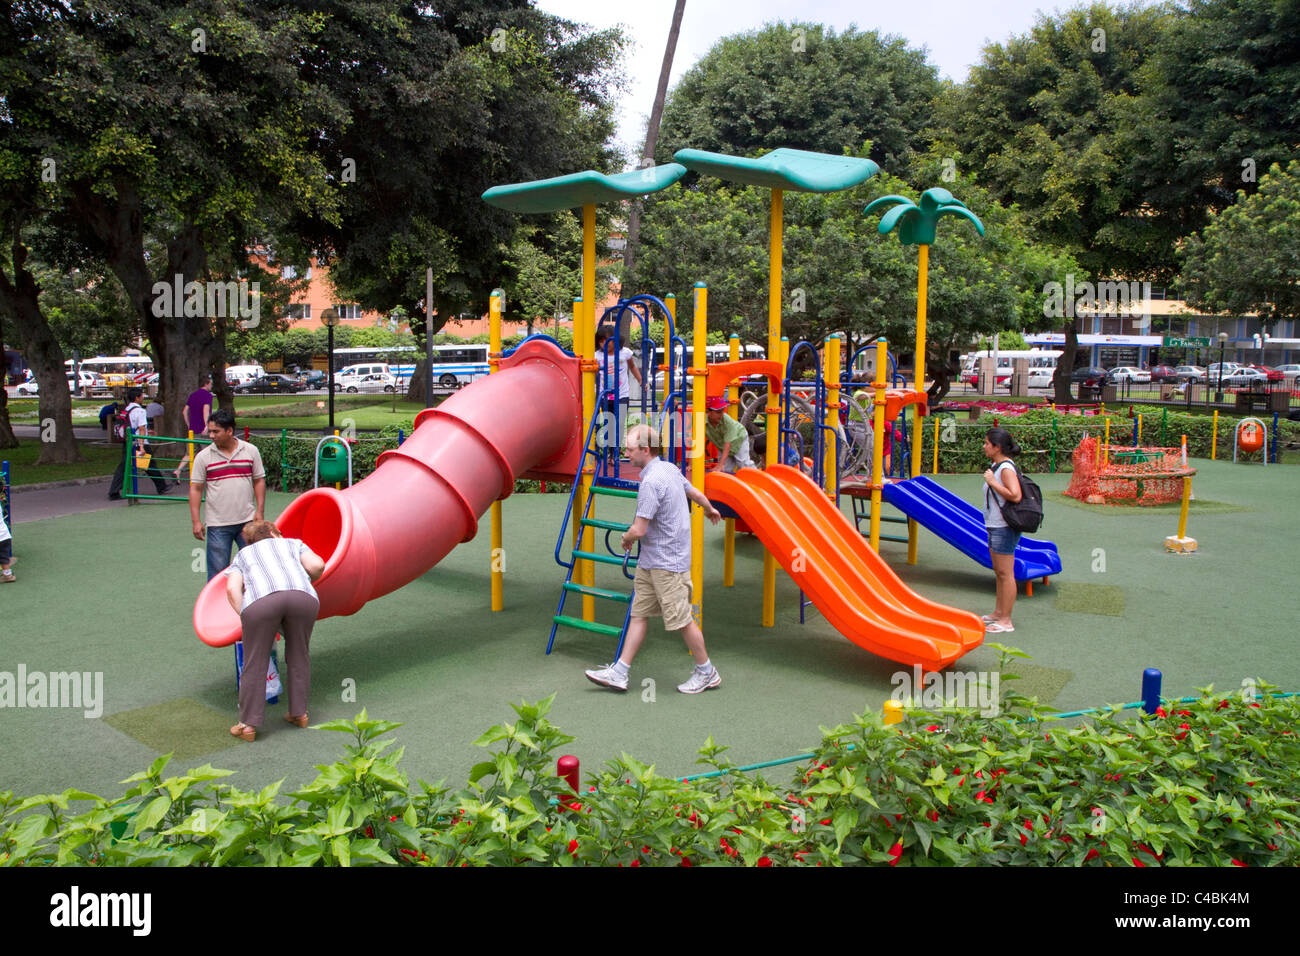 Playground equipment in Central Park of the Miraflores district of Lima, Peru. Stock Photo